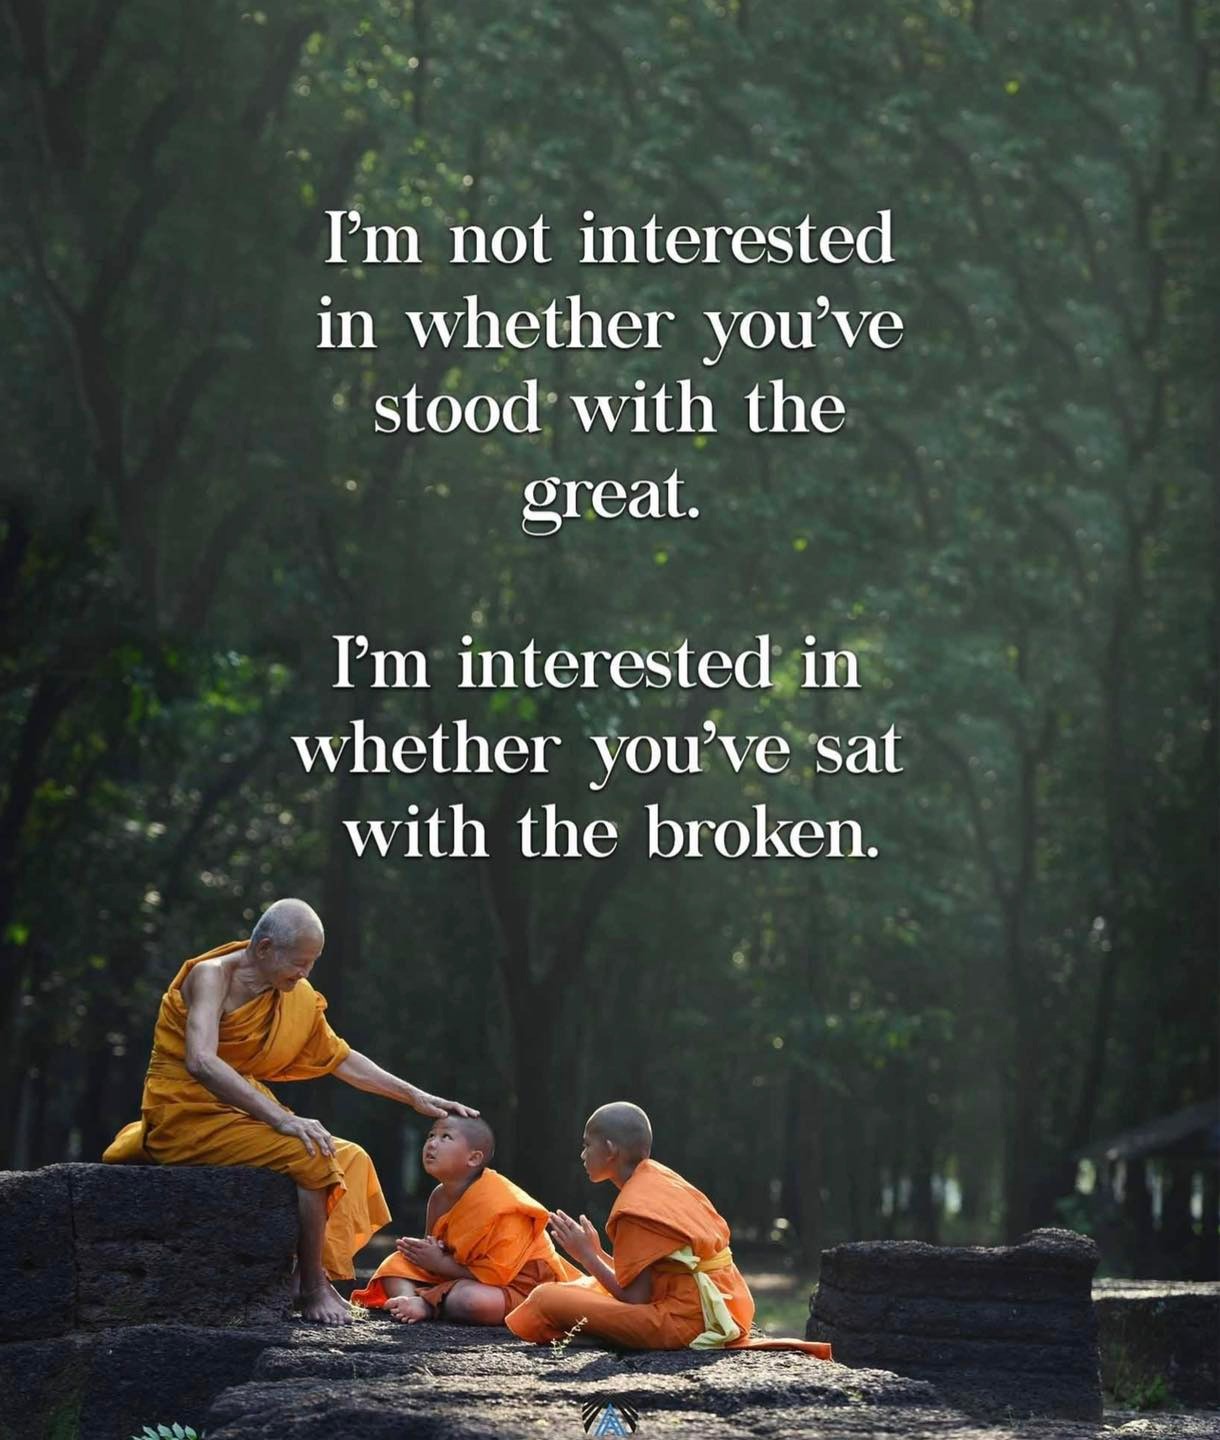 I’m not interested in whether you’ve stood with the great; I’m interested in whether you’ve sat with the broken.